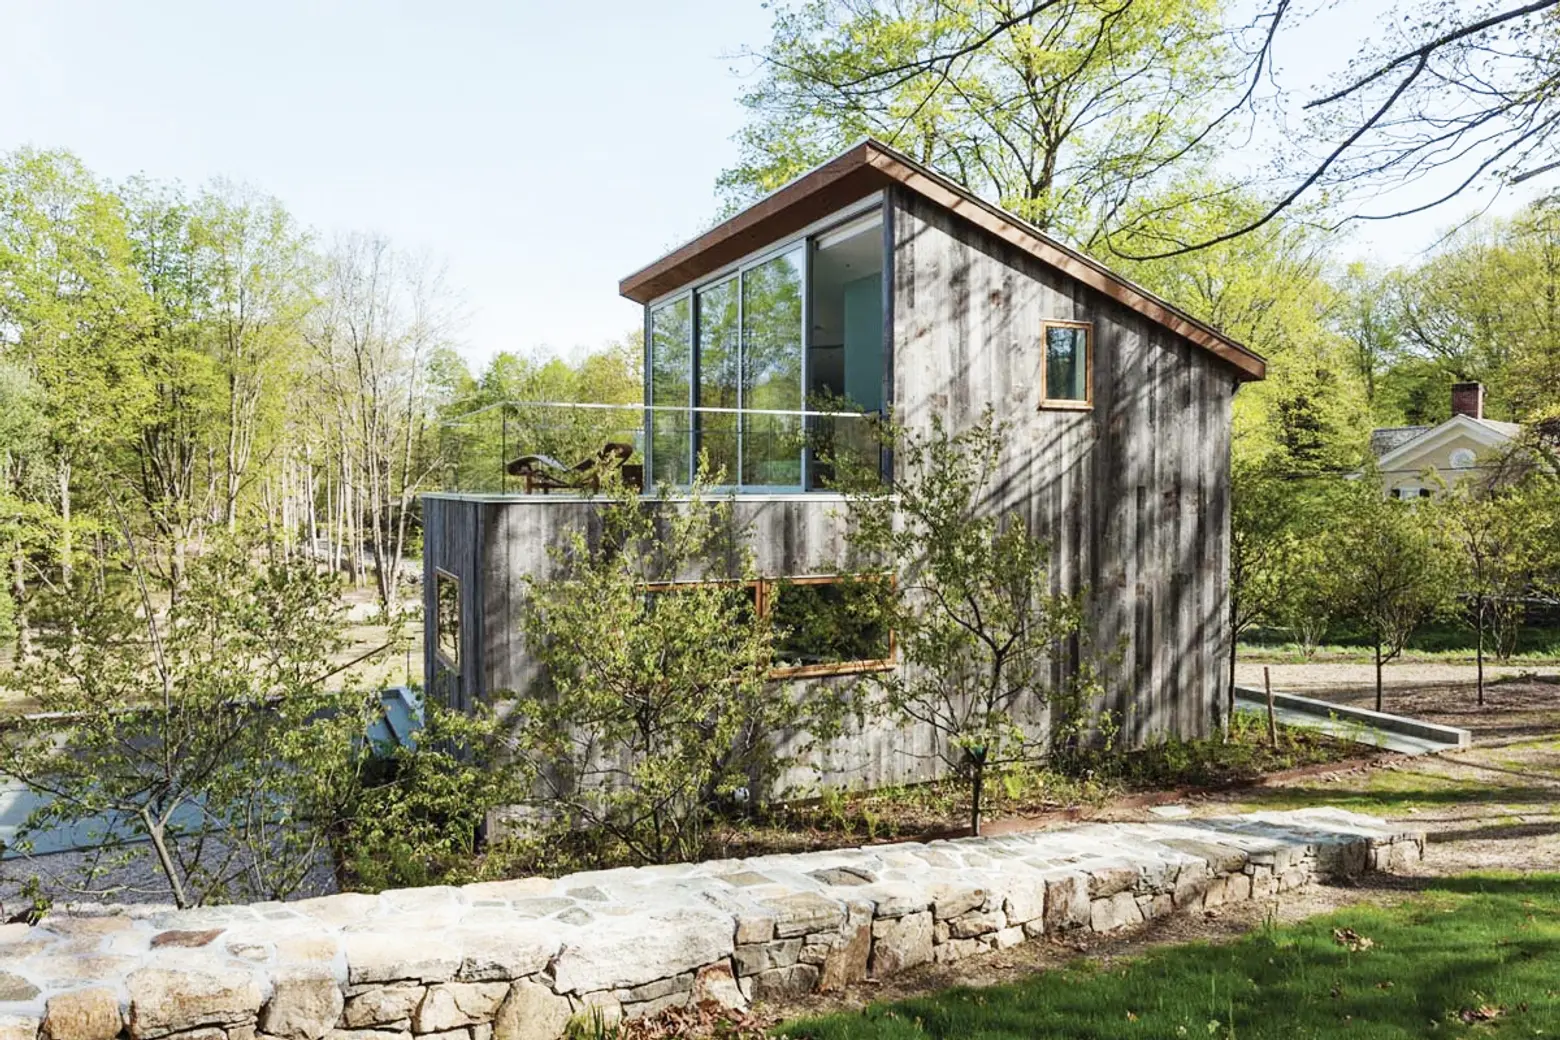 Architect Sharon Davis Builds Herself an Eco-Retreat Next to an Historic Upstate Road